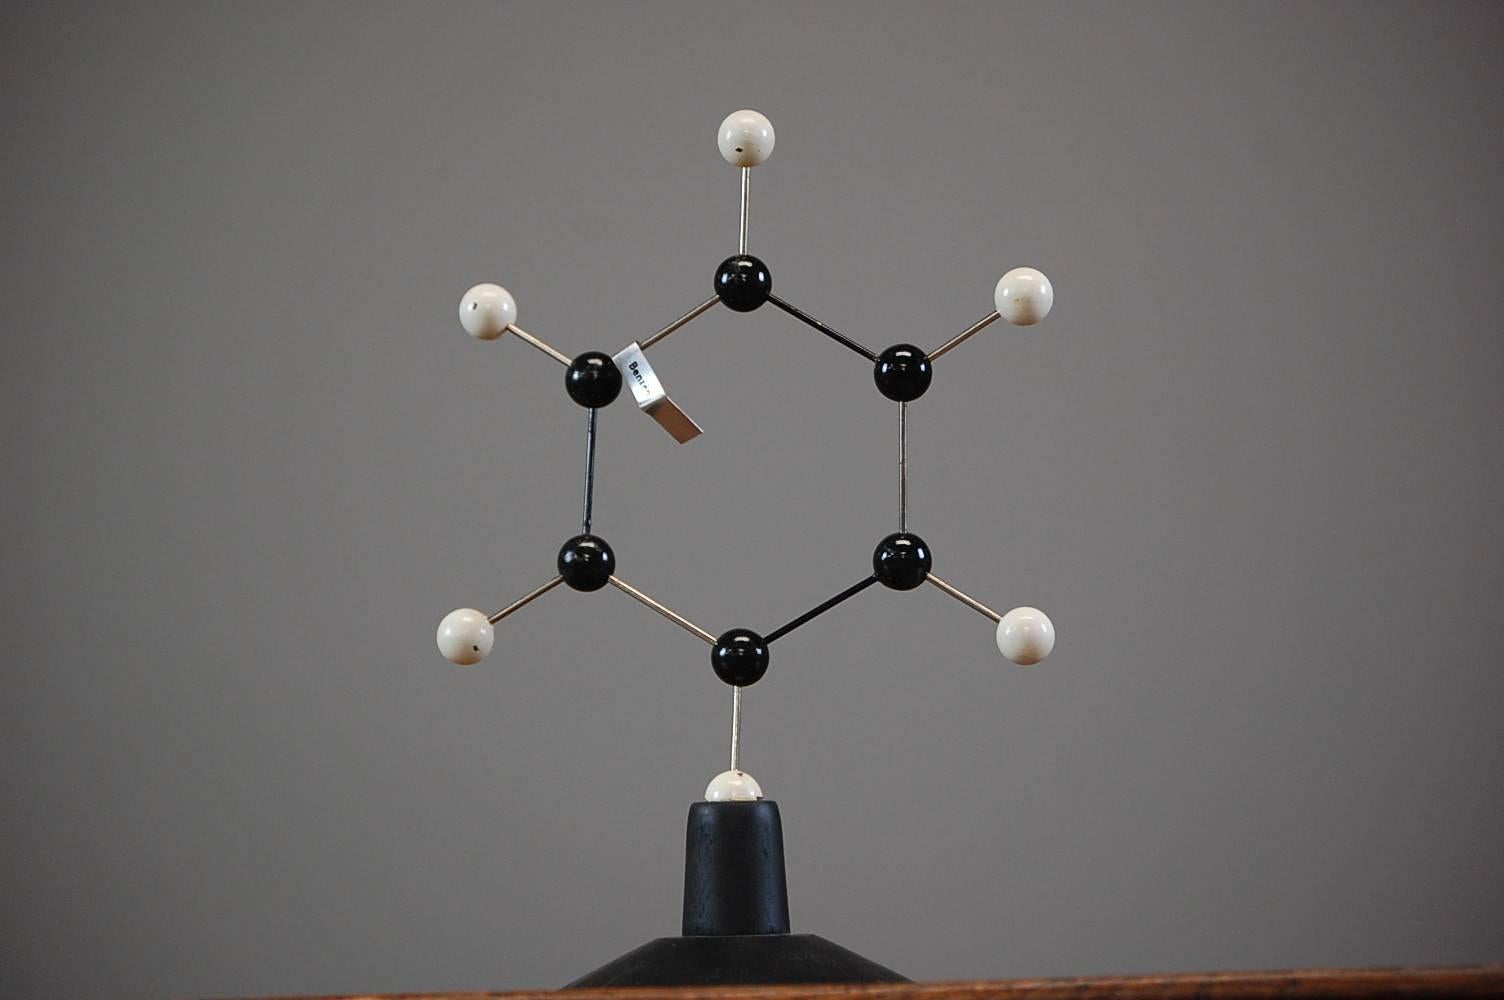 Collection of four midcentury atom models, on later stands, minor signs of ageing, great decorative display, measurement is for largest model, priced for the collection of four. Czech Republic, circa 1950.